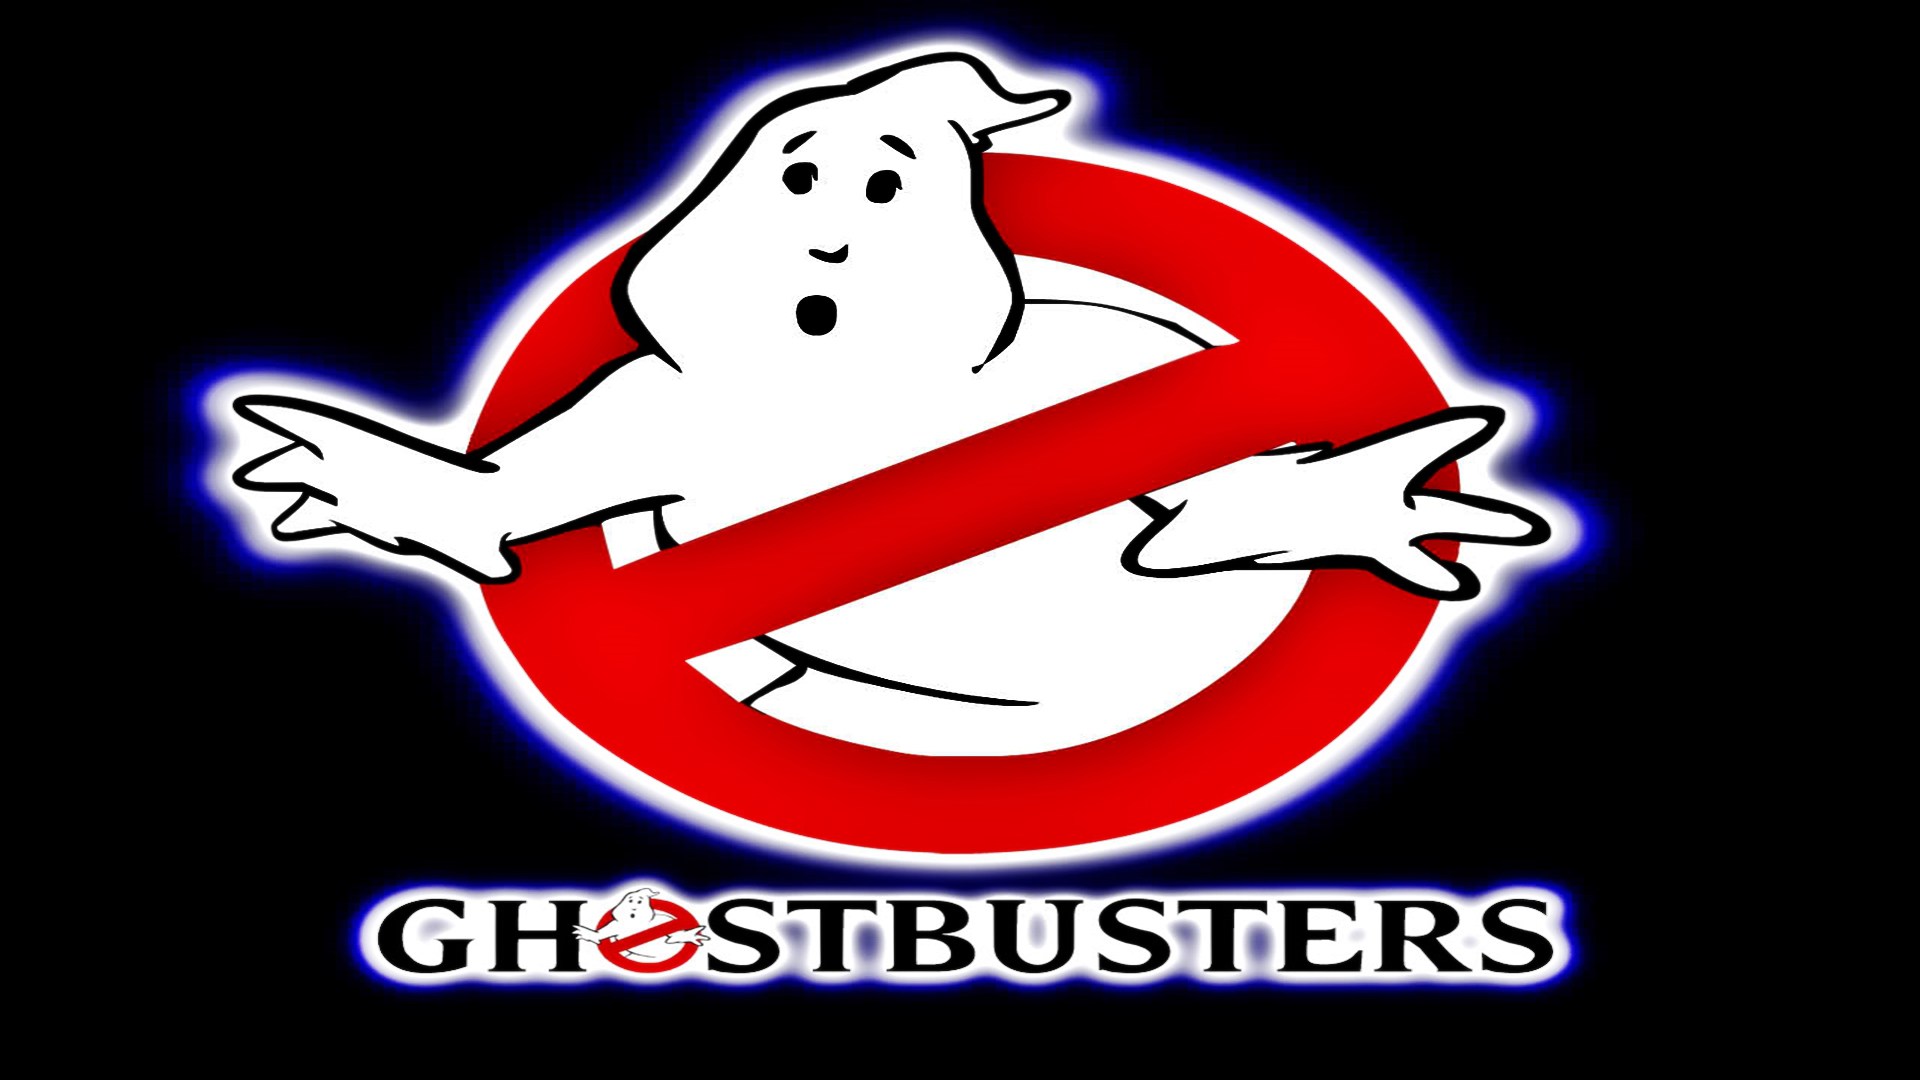 Ghostbusters Wallpaper Fever